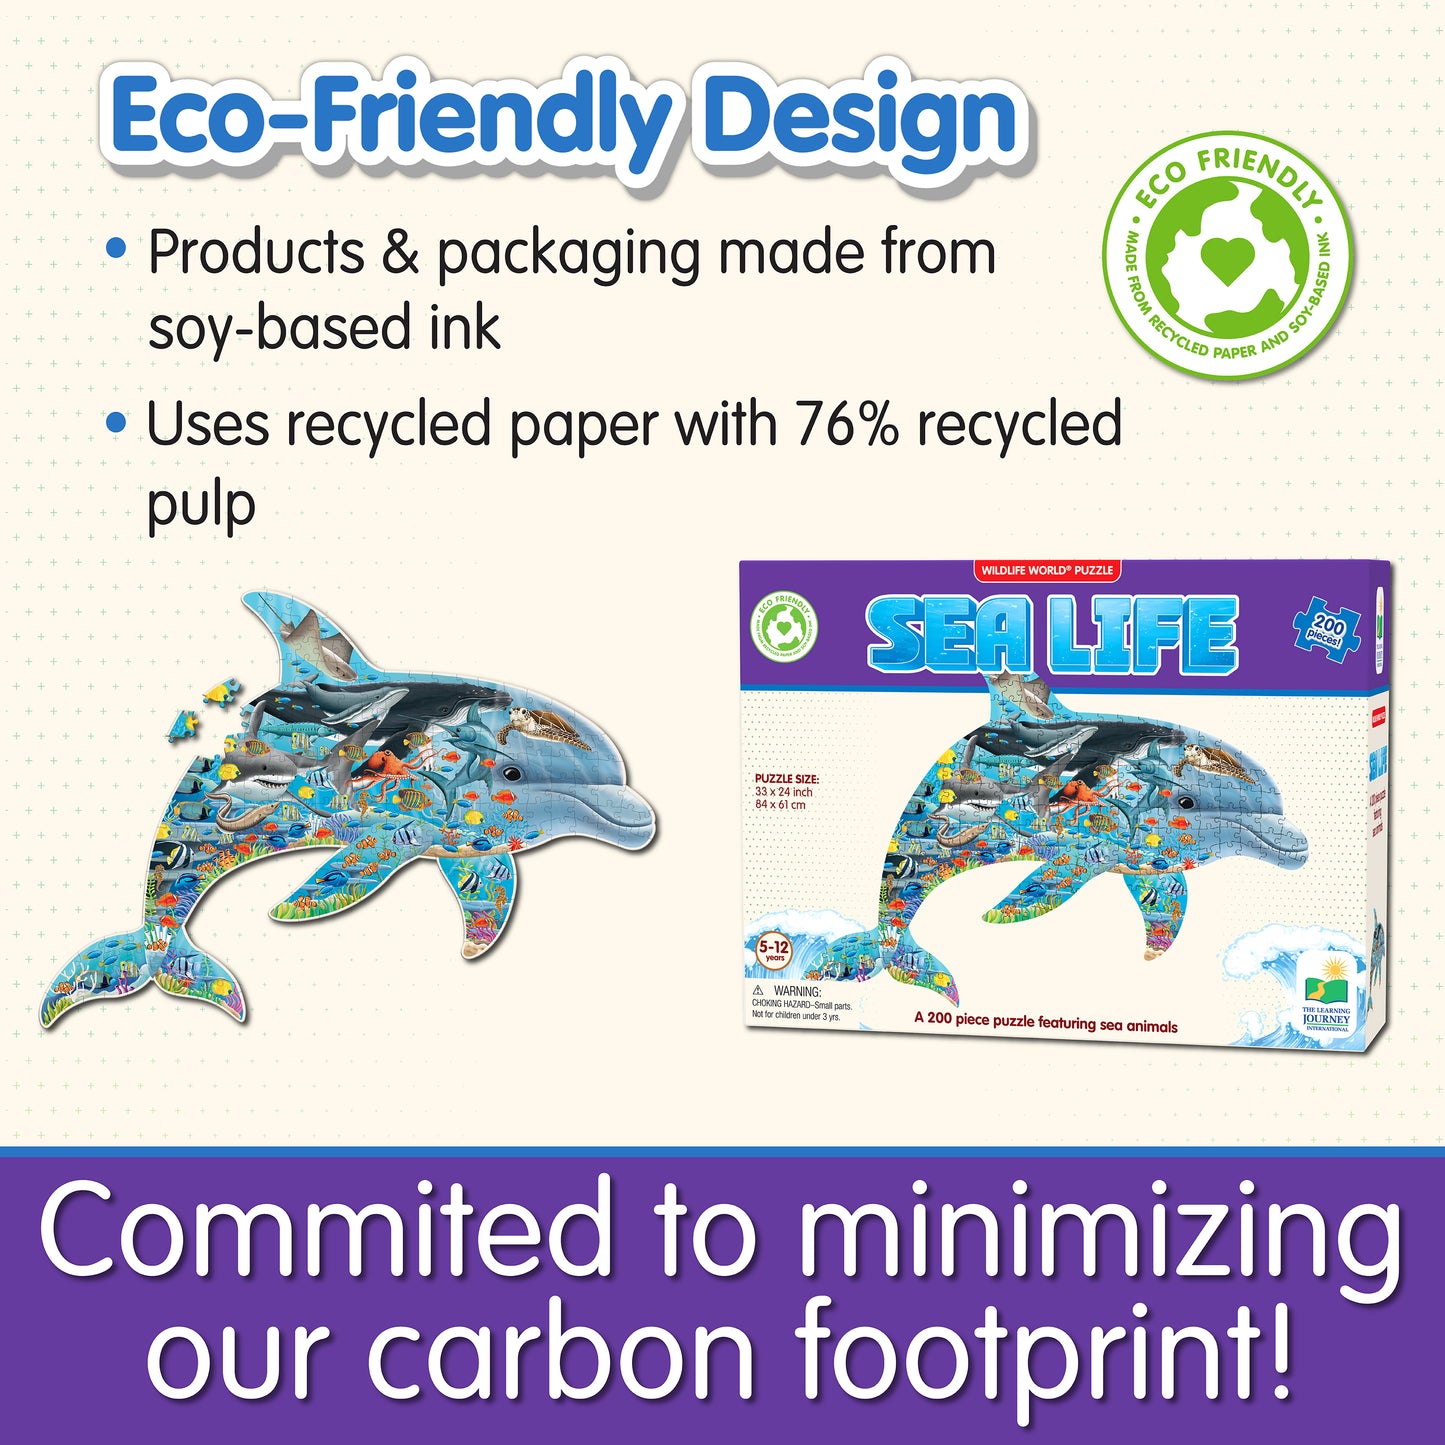 Infographic about Wildlife World Sea Life Puzzle's eco-friendly design that says, "Committed to minimizing our carbon footprint!"